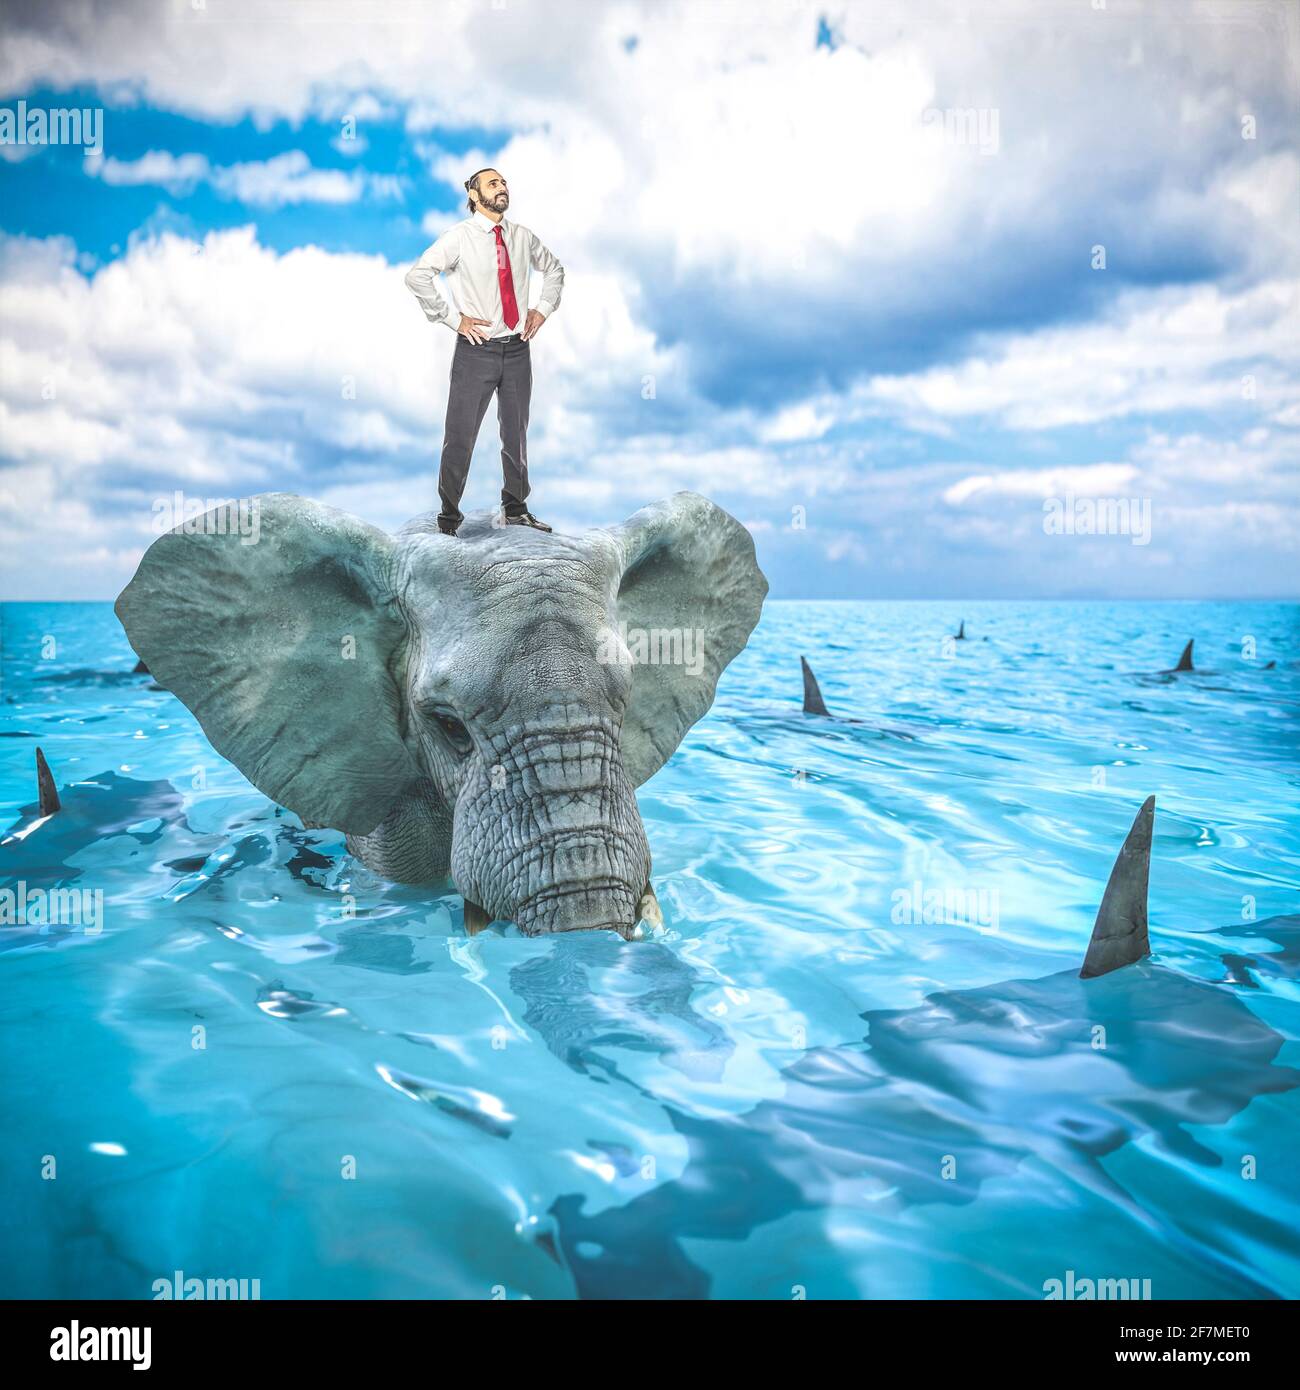 businessman standing on an elephant walking in the water surrounded by sharks. Stock Photo